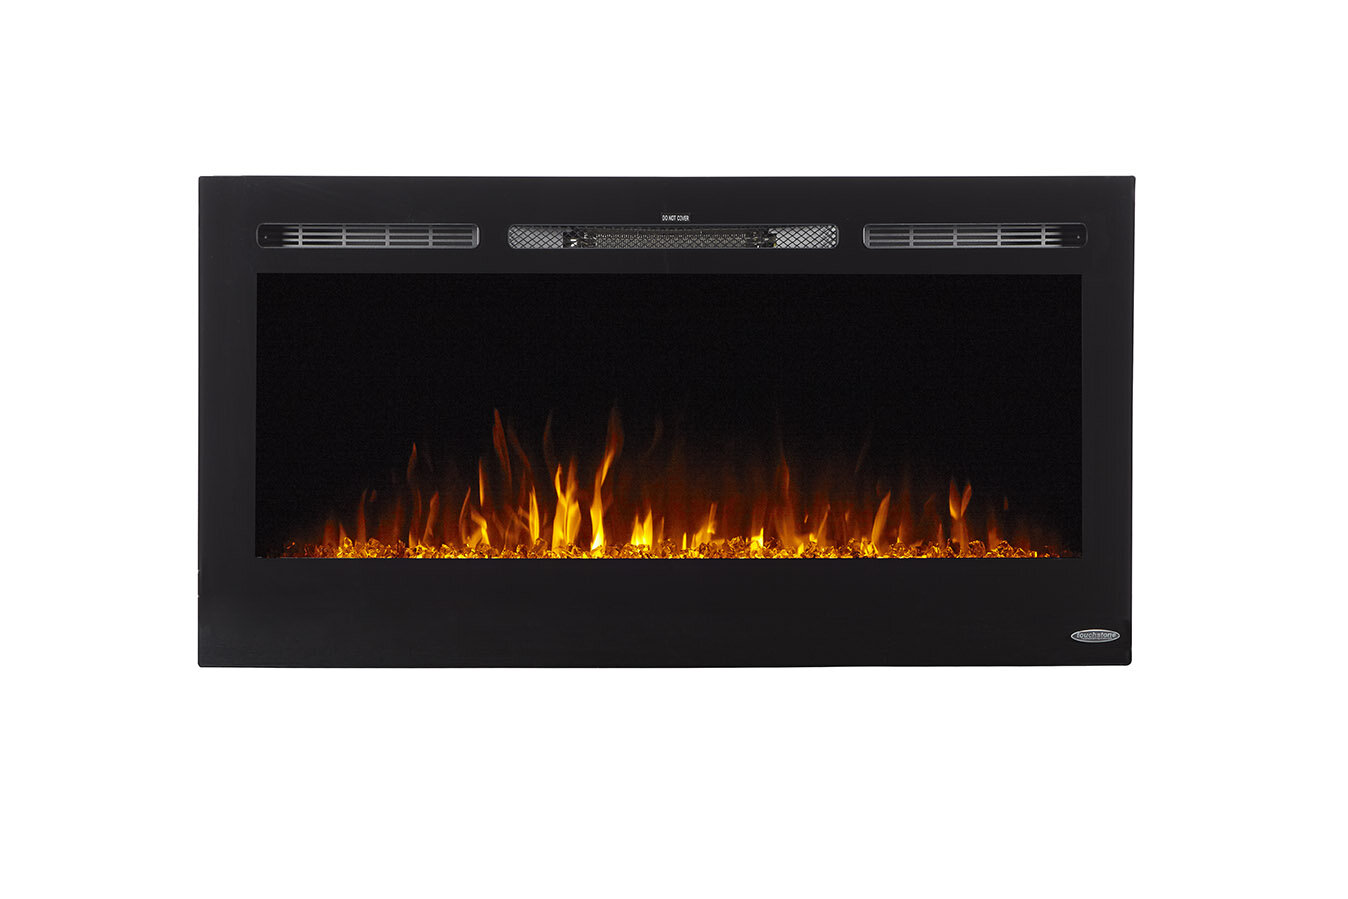 Wayfair Electric Fireplace Inserts Awesome Annetta Recessed Wall Mounted Electric Fireplace